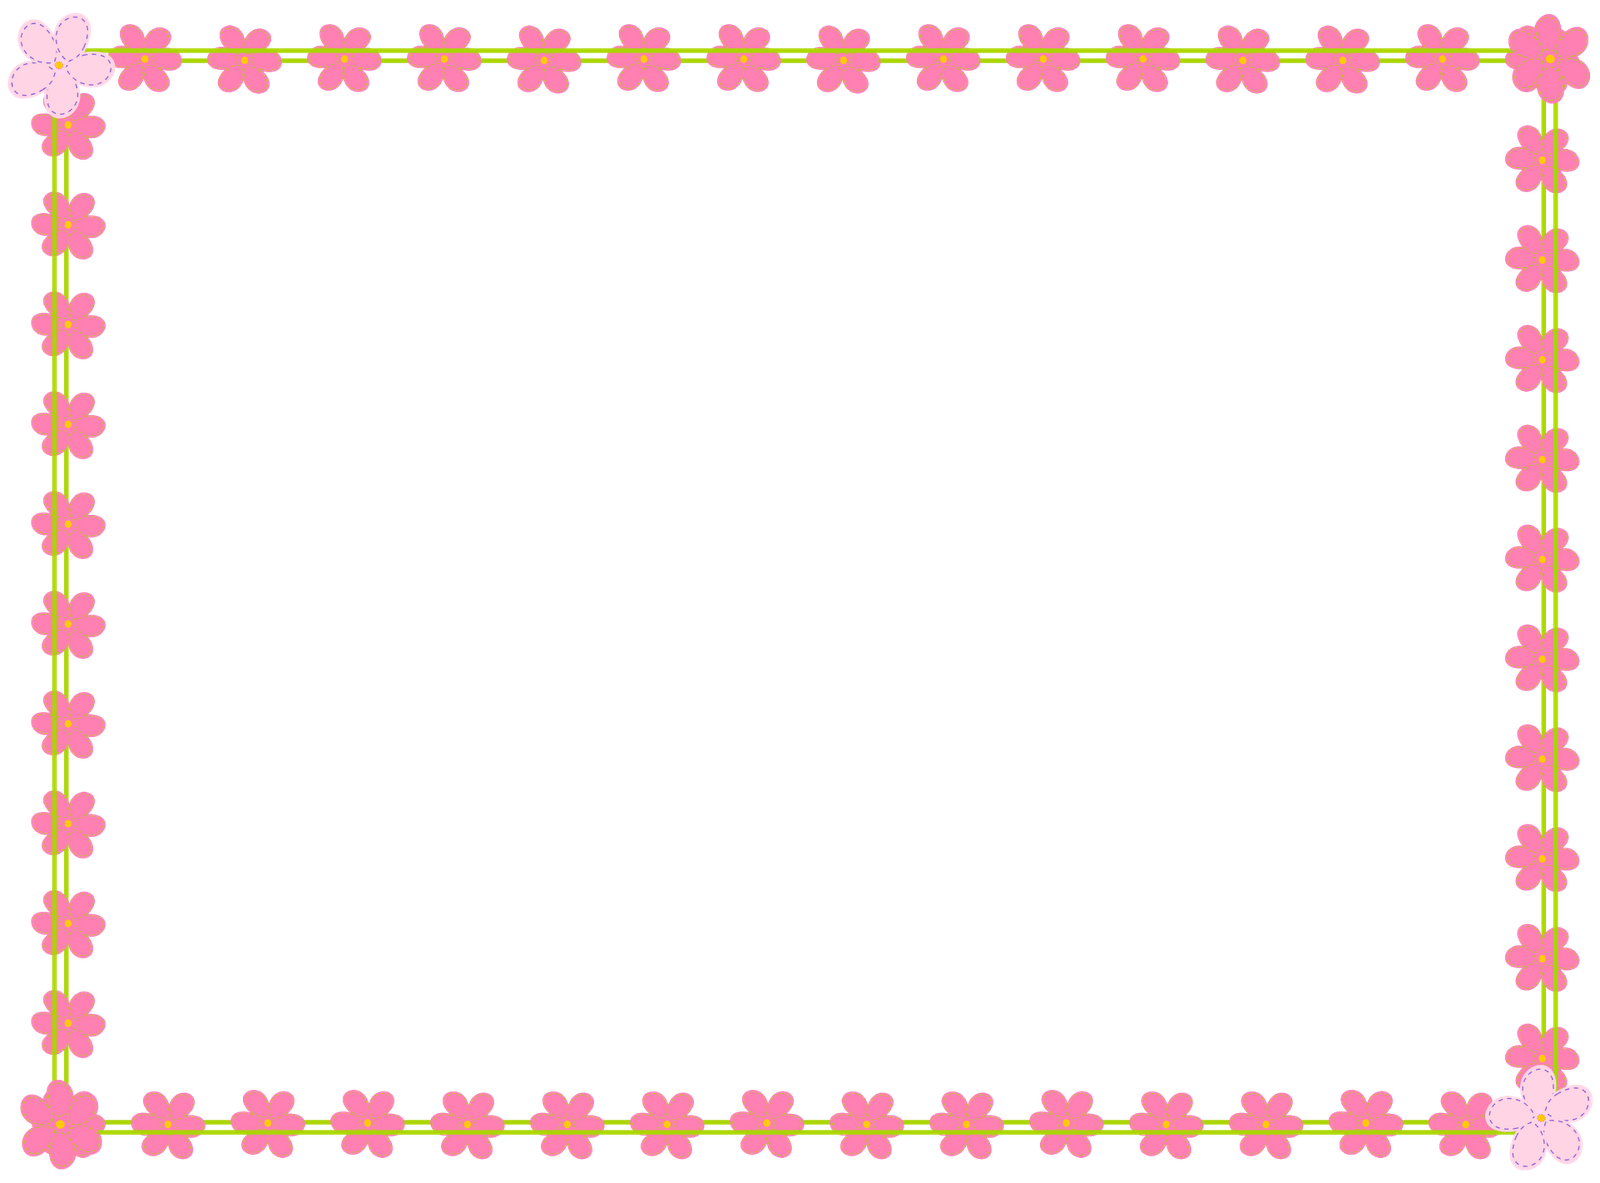 free clipart of flower borders - photo #38